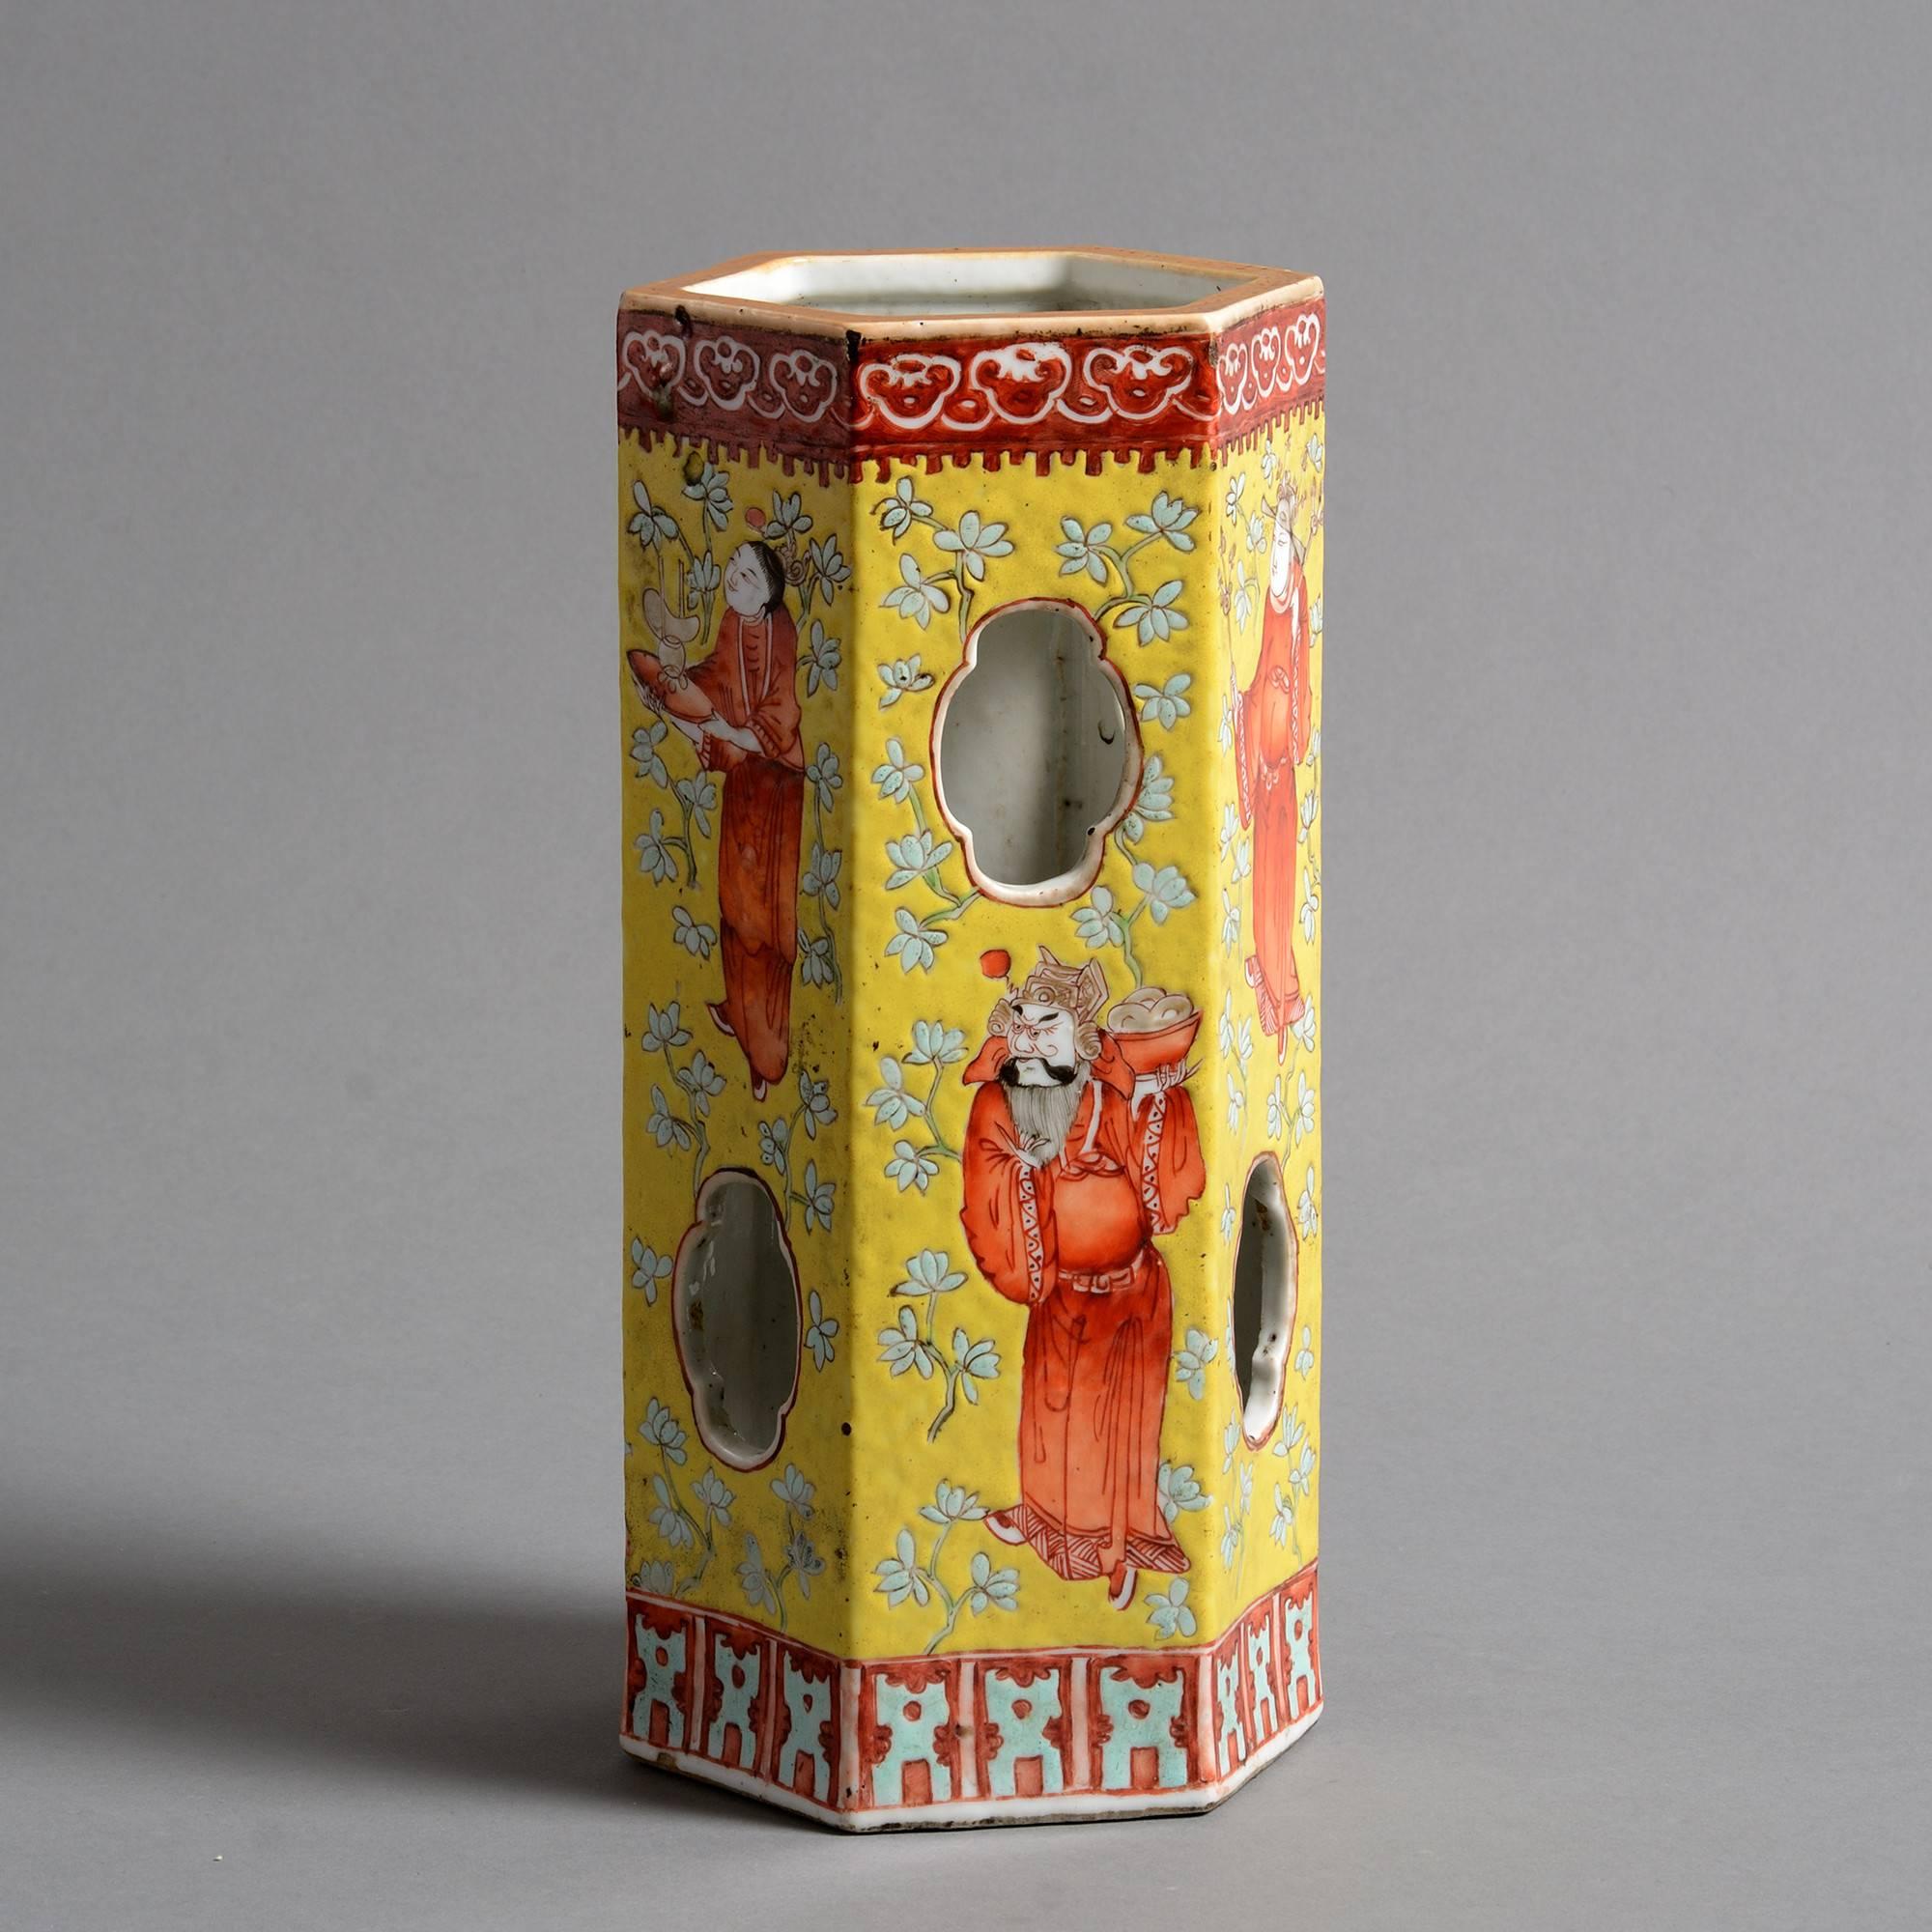 A 19th century porcelain hat stand of hexagonal form, having a pierced body, with figurative decoration in red and turquoise glazes upon a yellow ground. 

Qing dynasty.